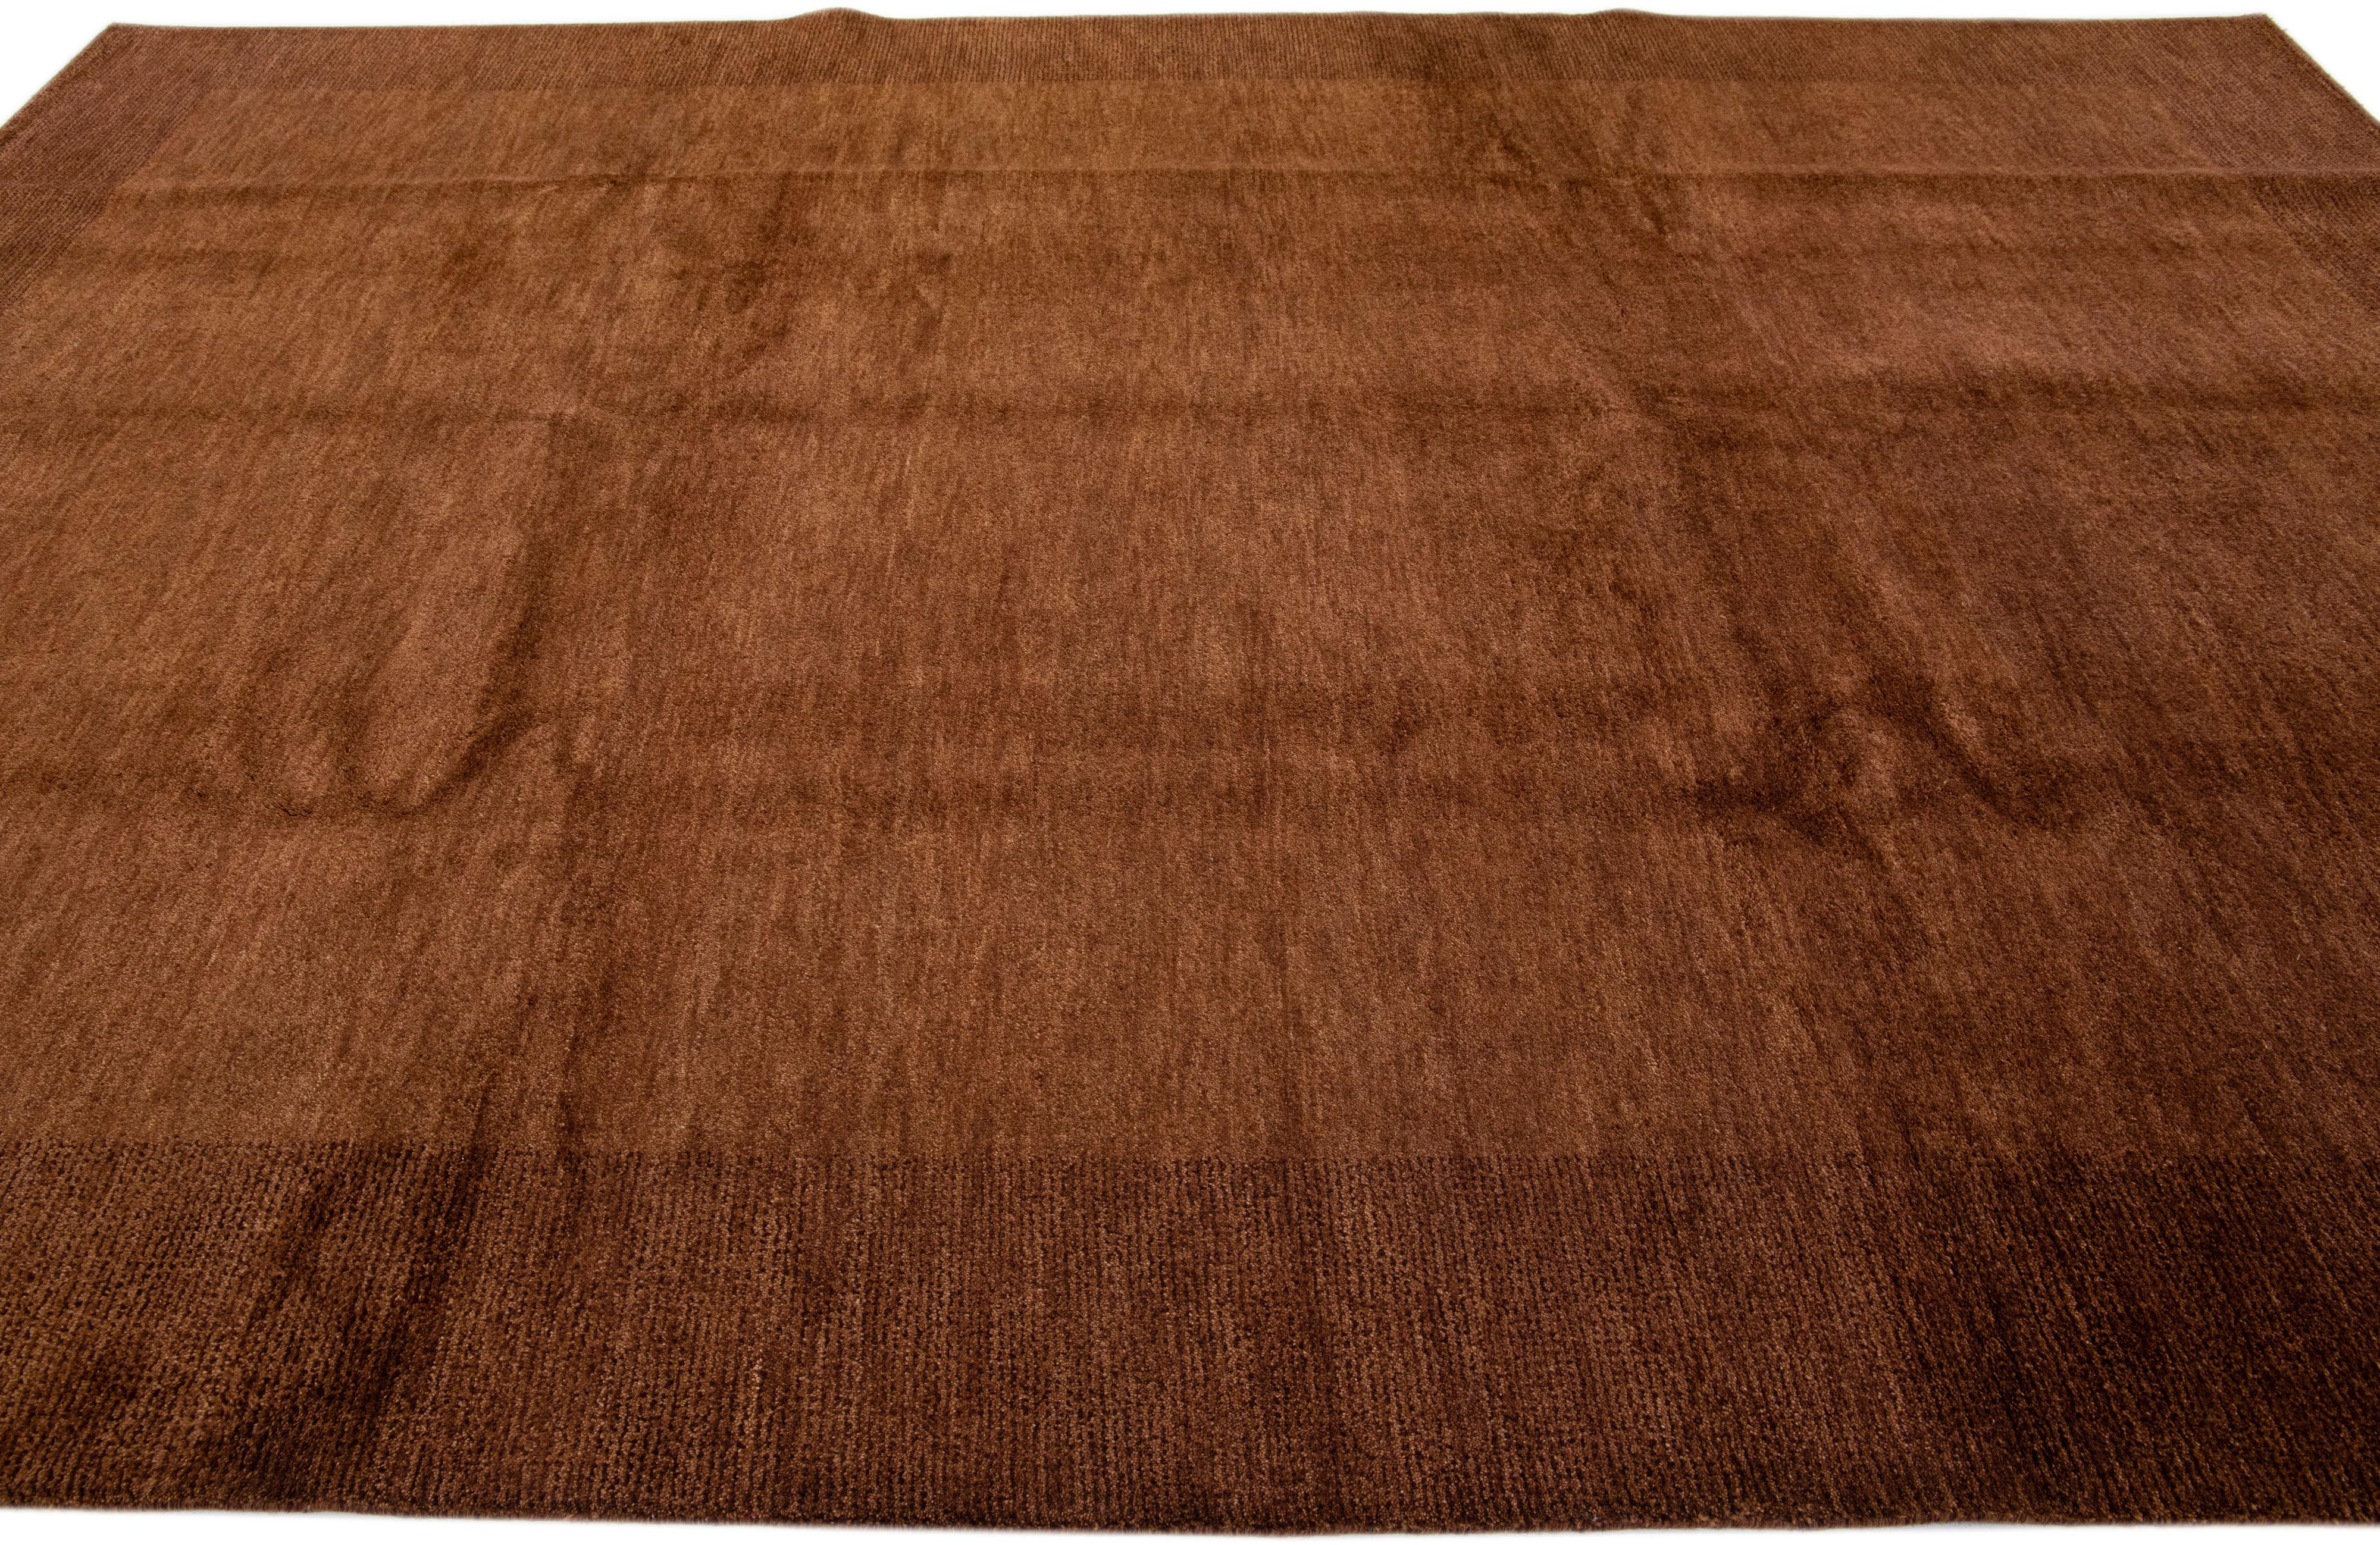 Handmade Modern Persian Gabbeh Wool Rug with Brown Solid Motif In New Condition For Sale In Norwalk, CT